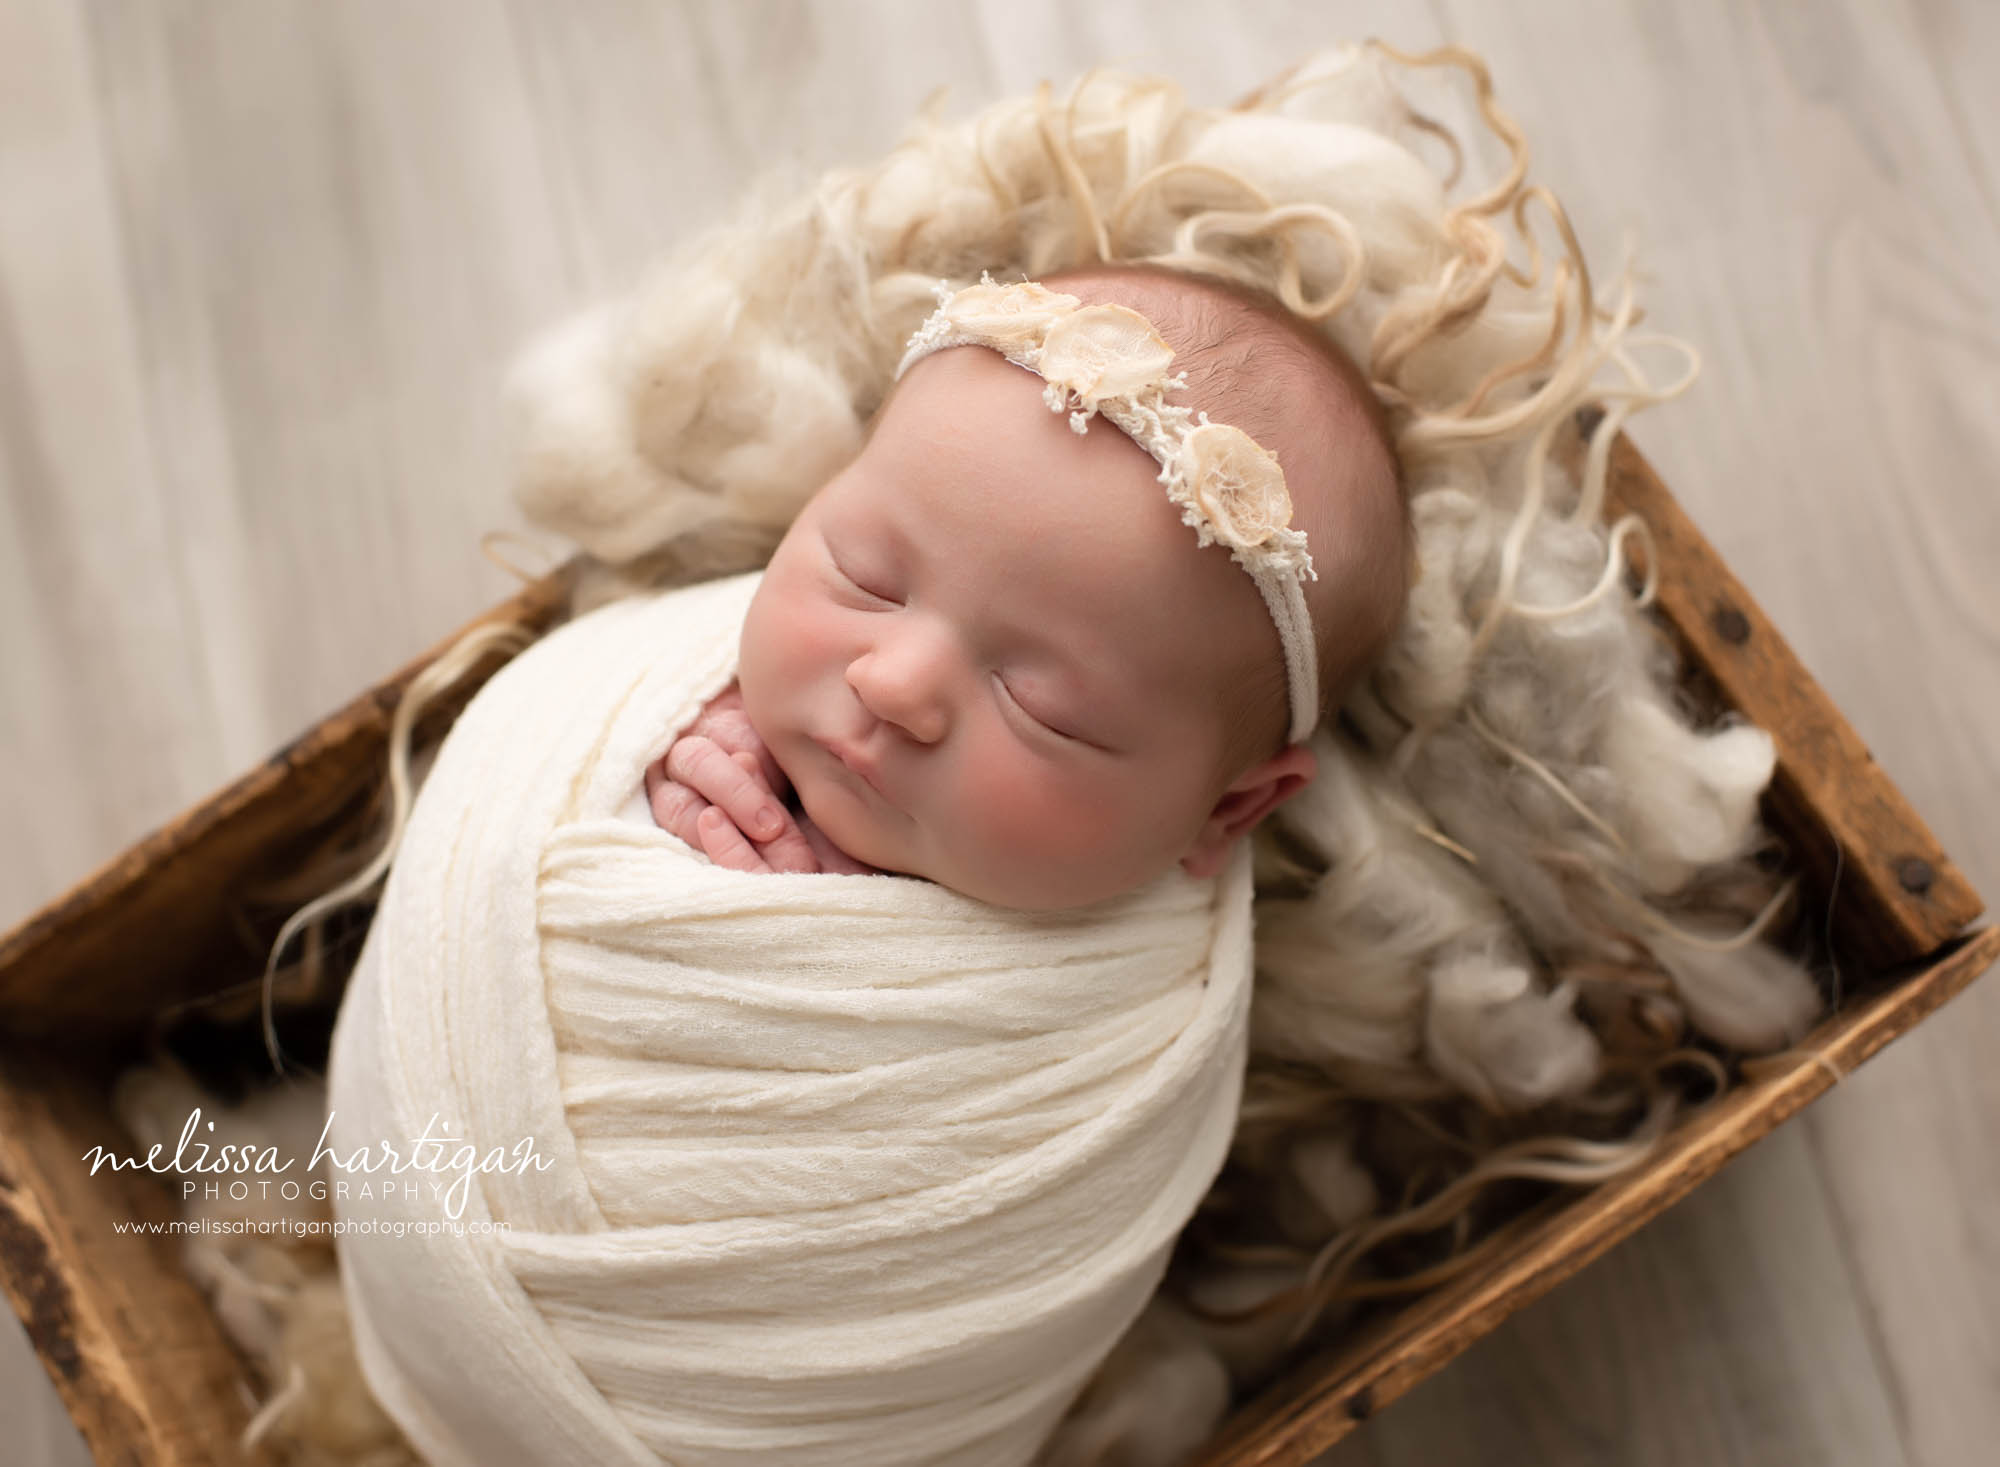 Babygirl wrapped and posed in a rustic crate CT newborn Photography